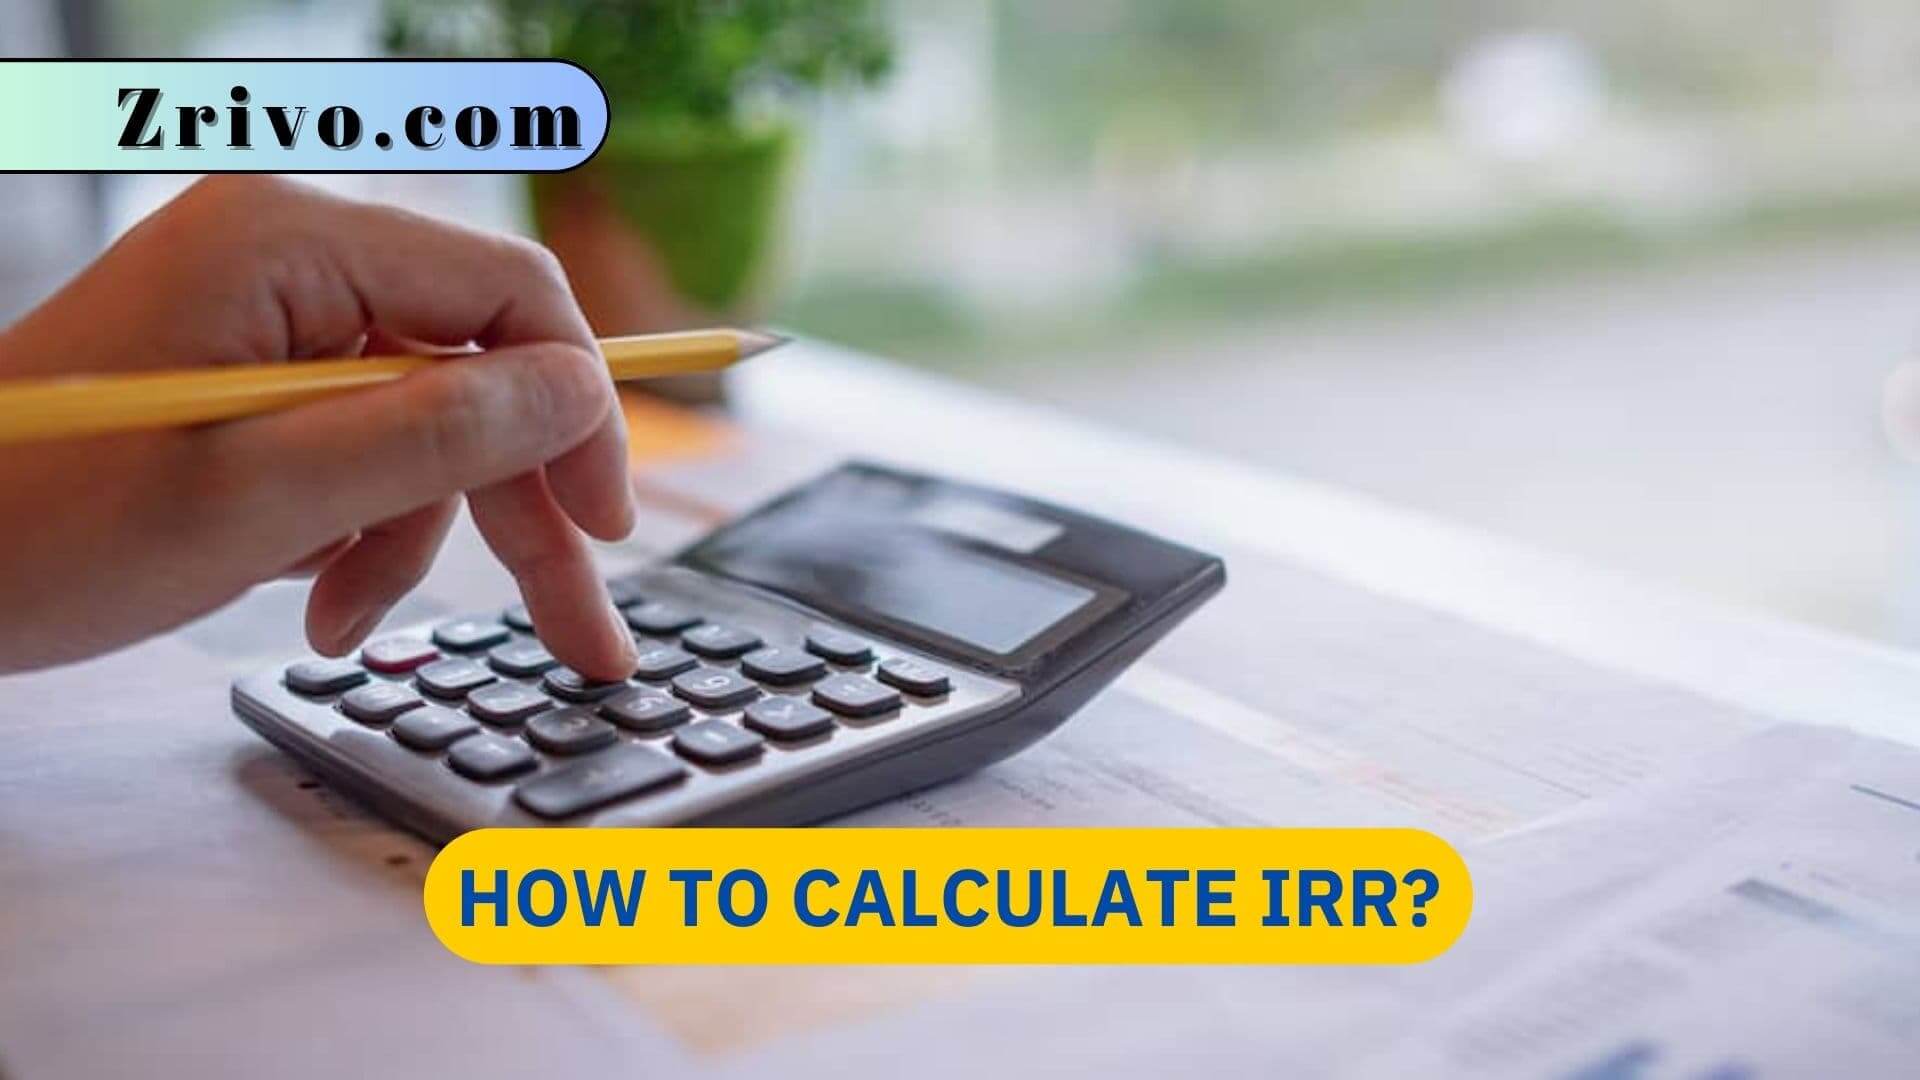 How to Calculate IRR?